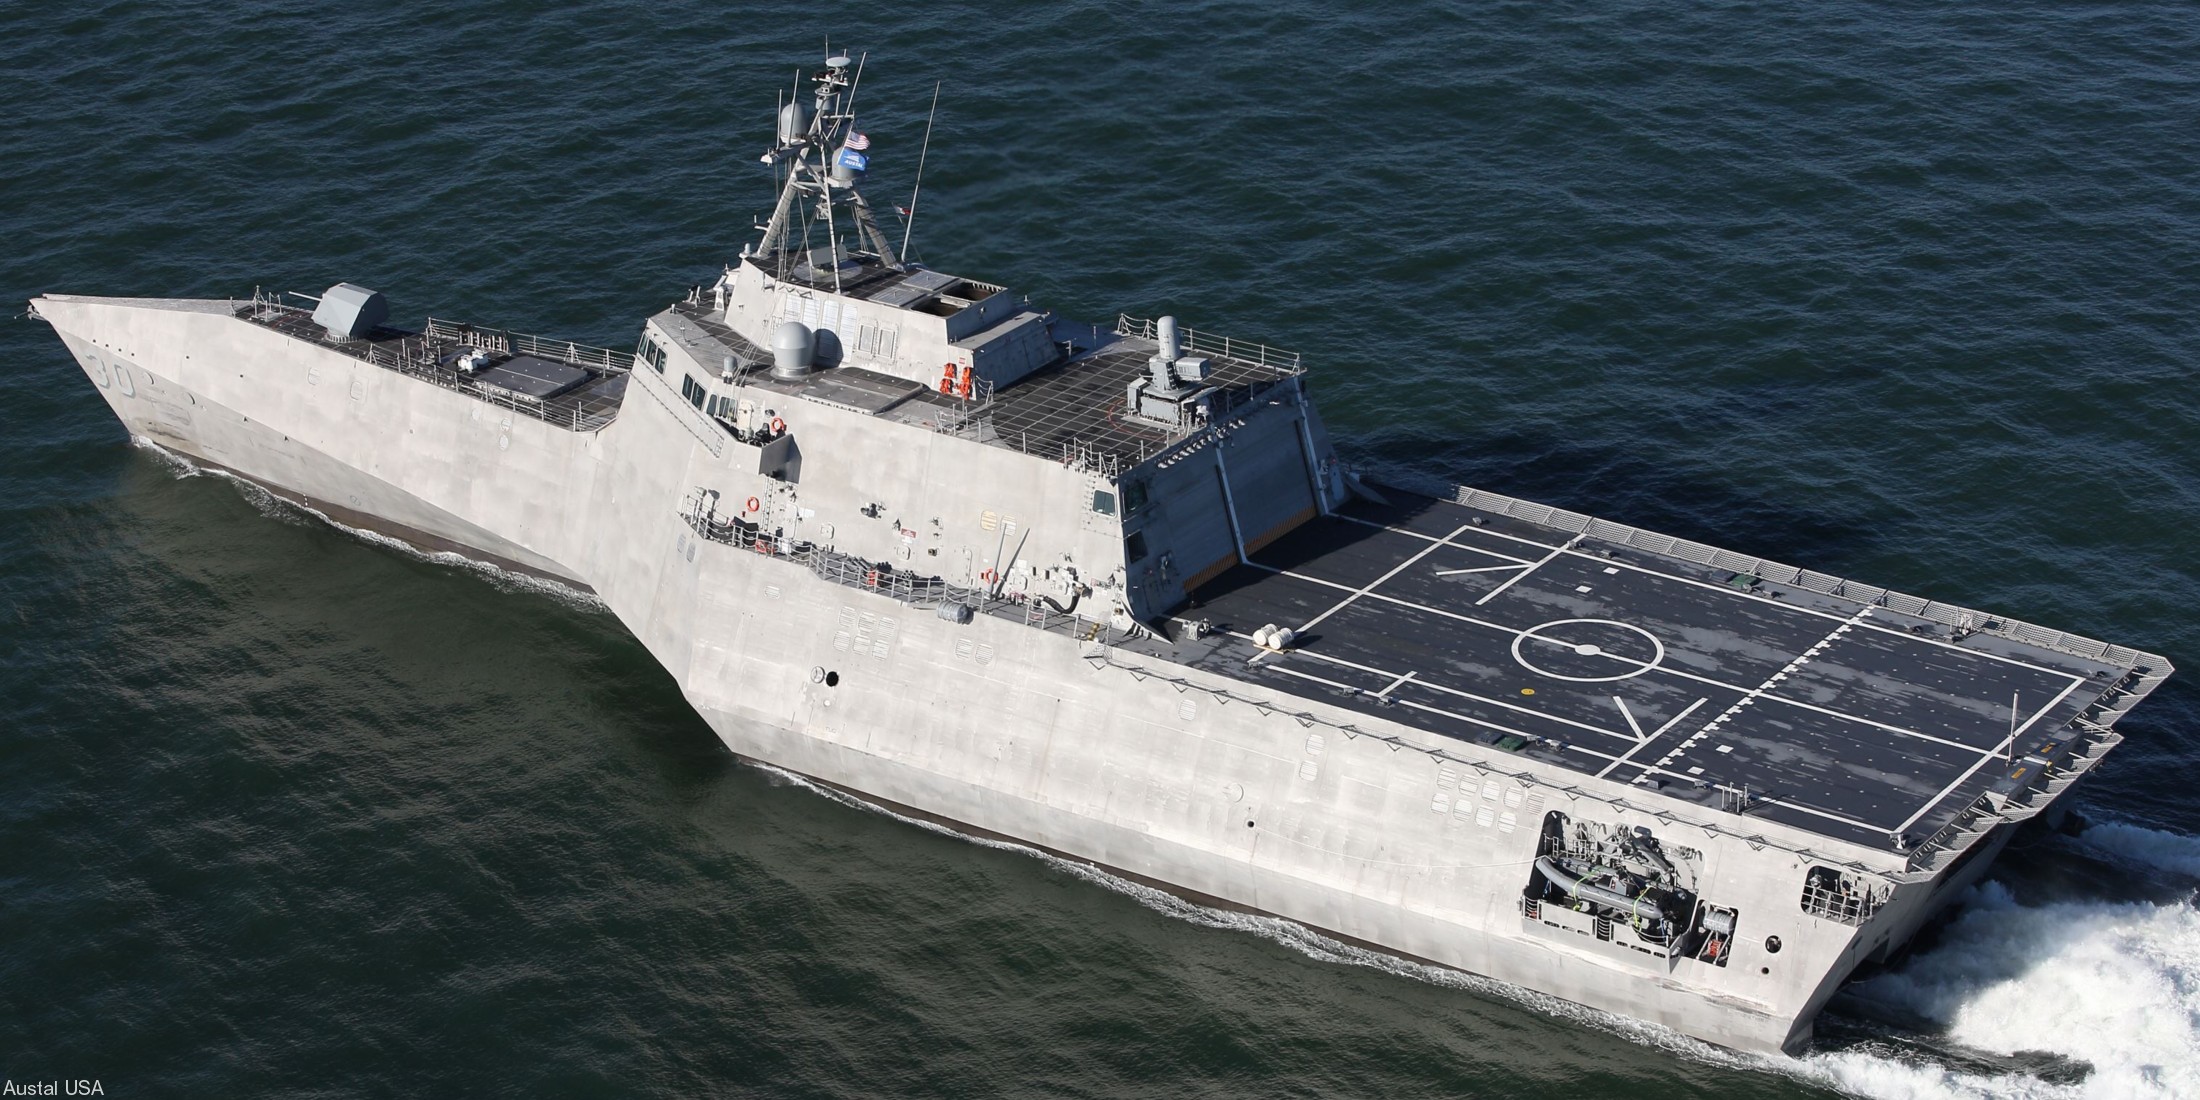 lcs-30 uss canberra littoral combat ship independence class us navy acceptance trials 08